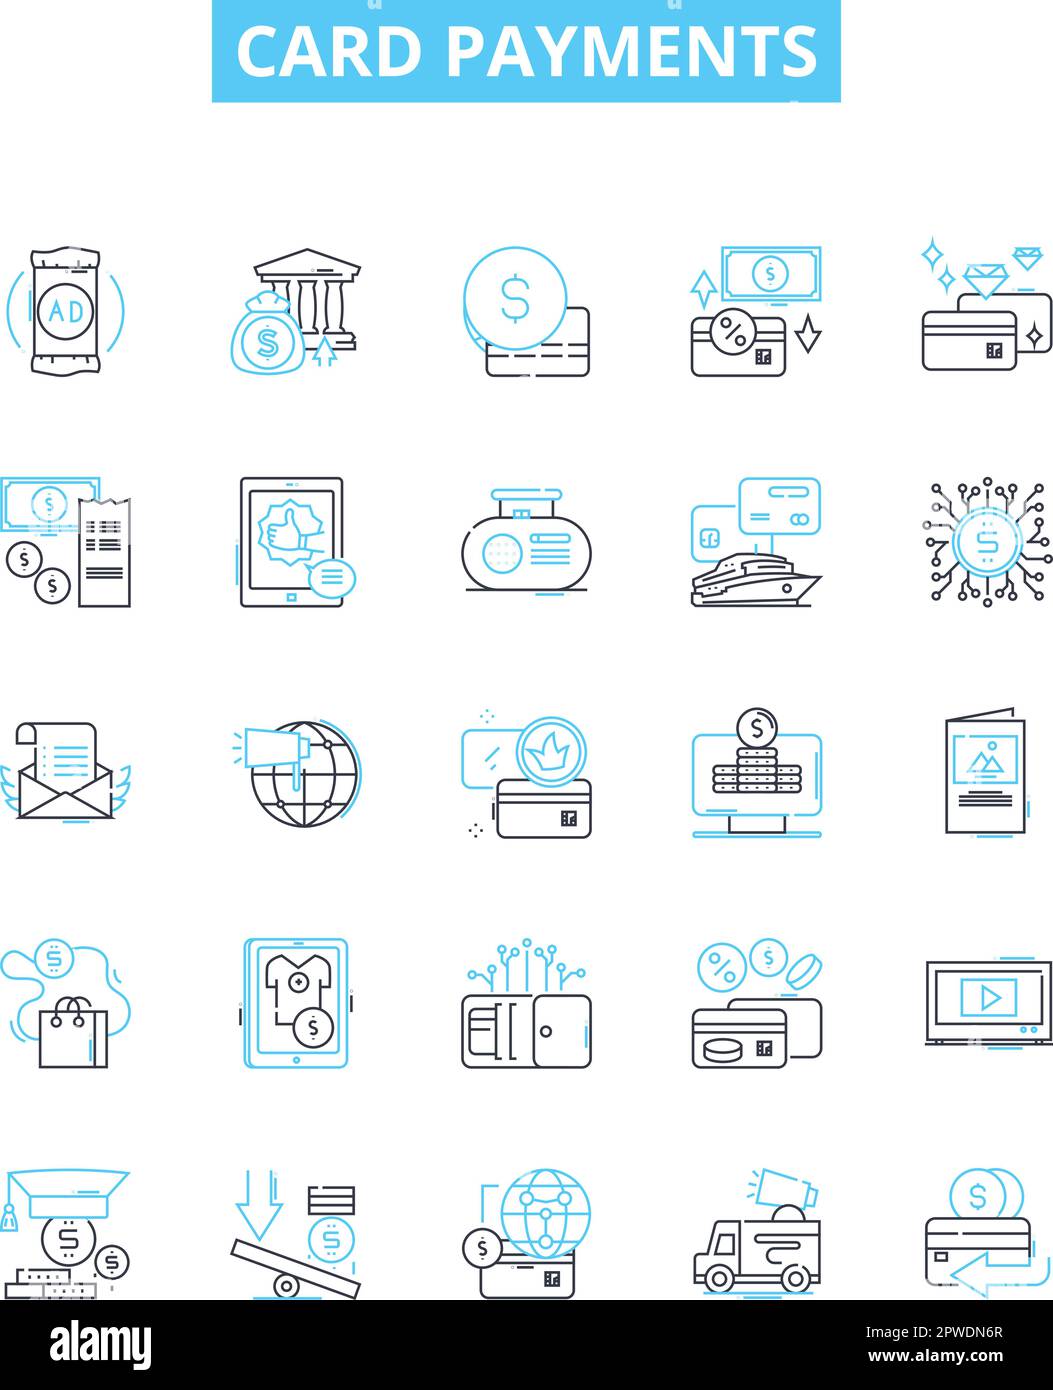 Card payments vector line icons set. Card, Payments, Credit, Debit, Visa, Mastercard, American Express illustration outline concept symbols and signs Stock Vector